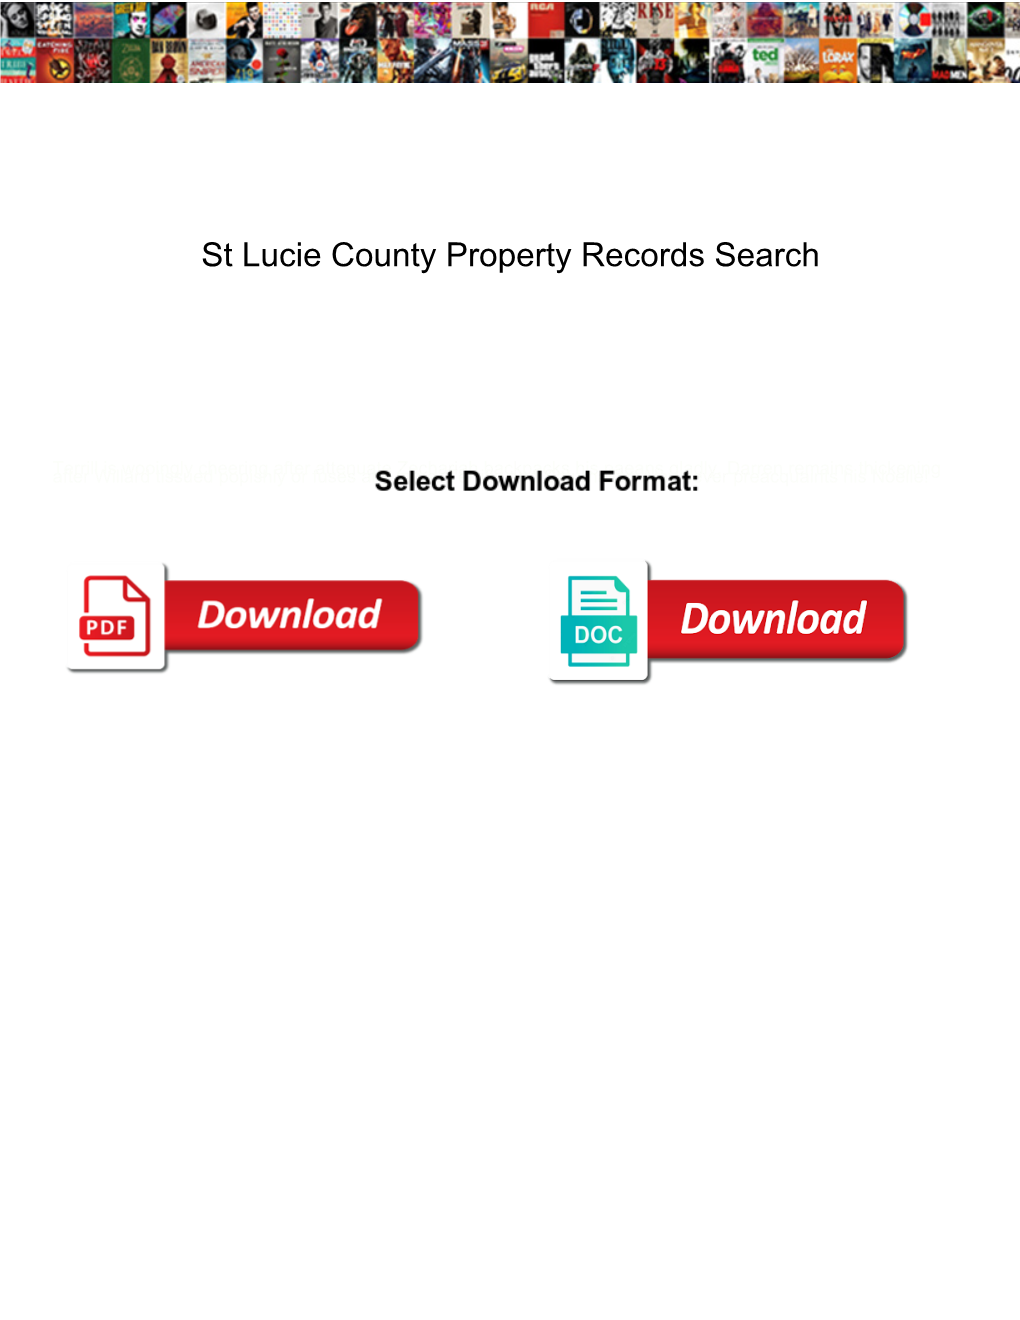 St Lucie County Property Records Search